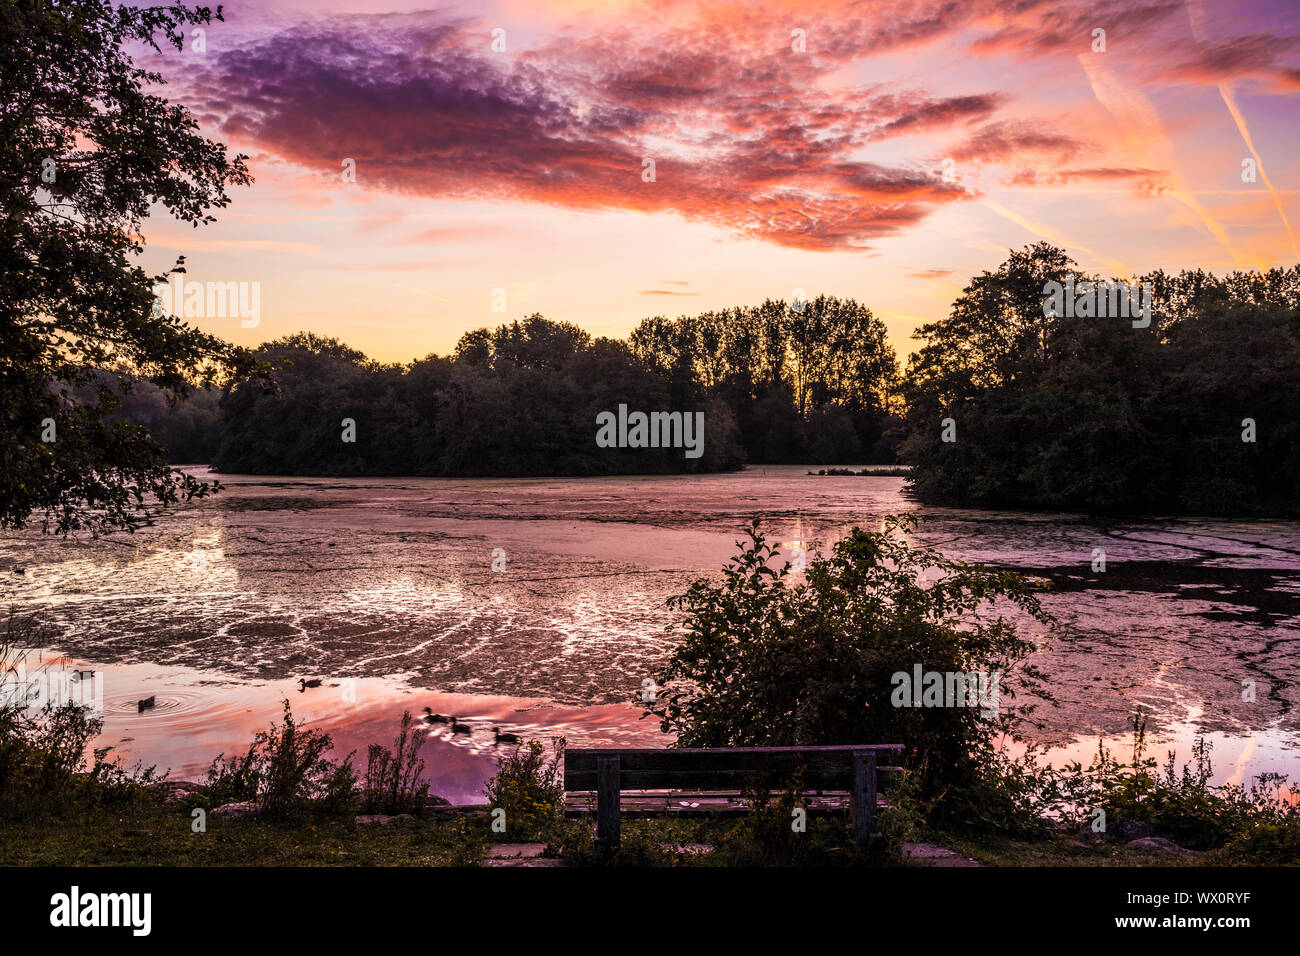 Sunrise over a small lake known as Liden Lagoon in Swindon, Wiltshire. Stock Photo